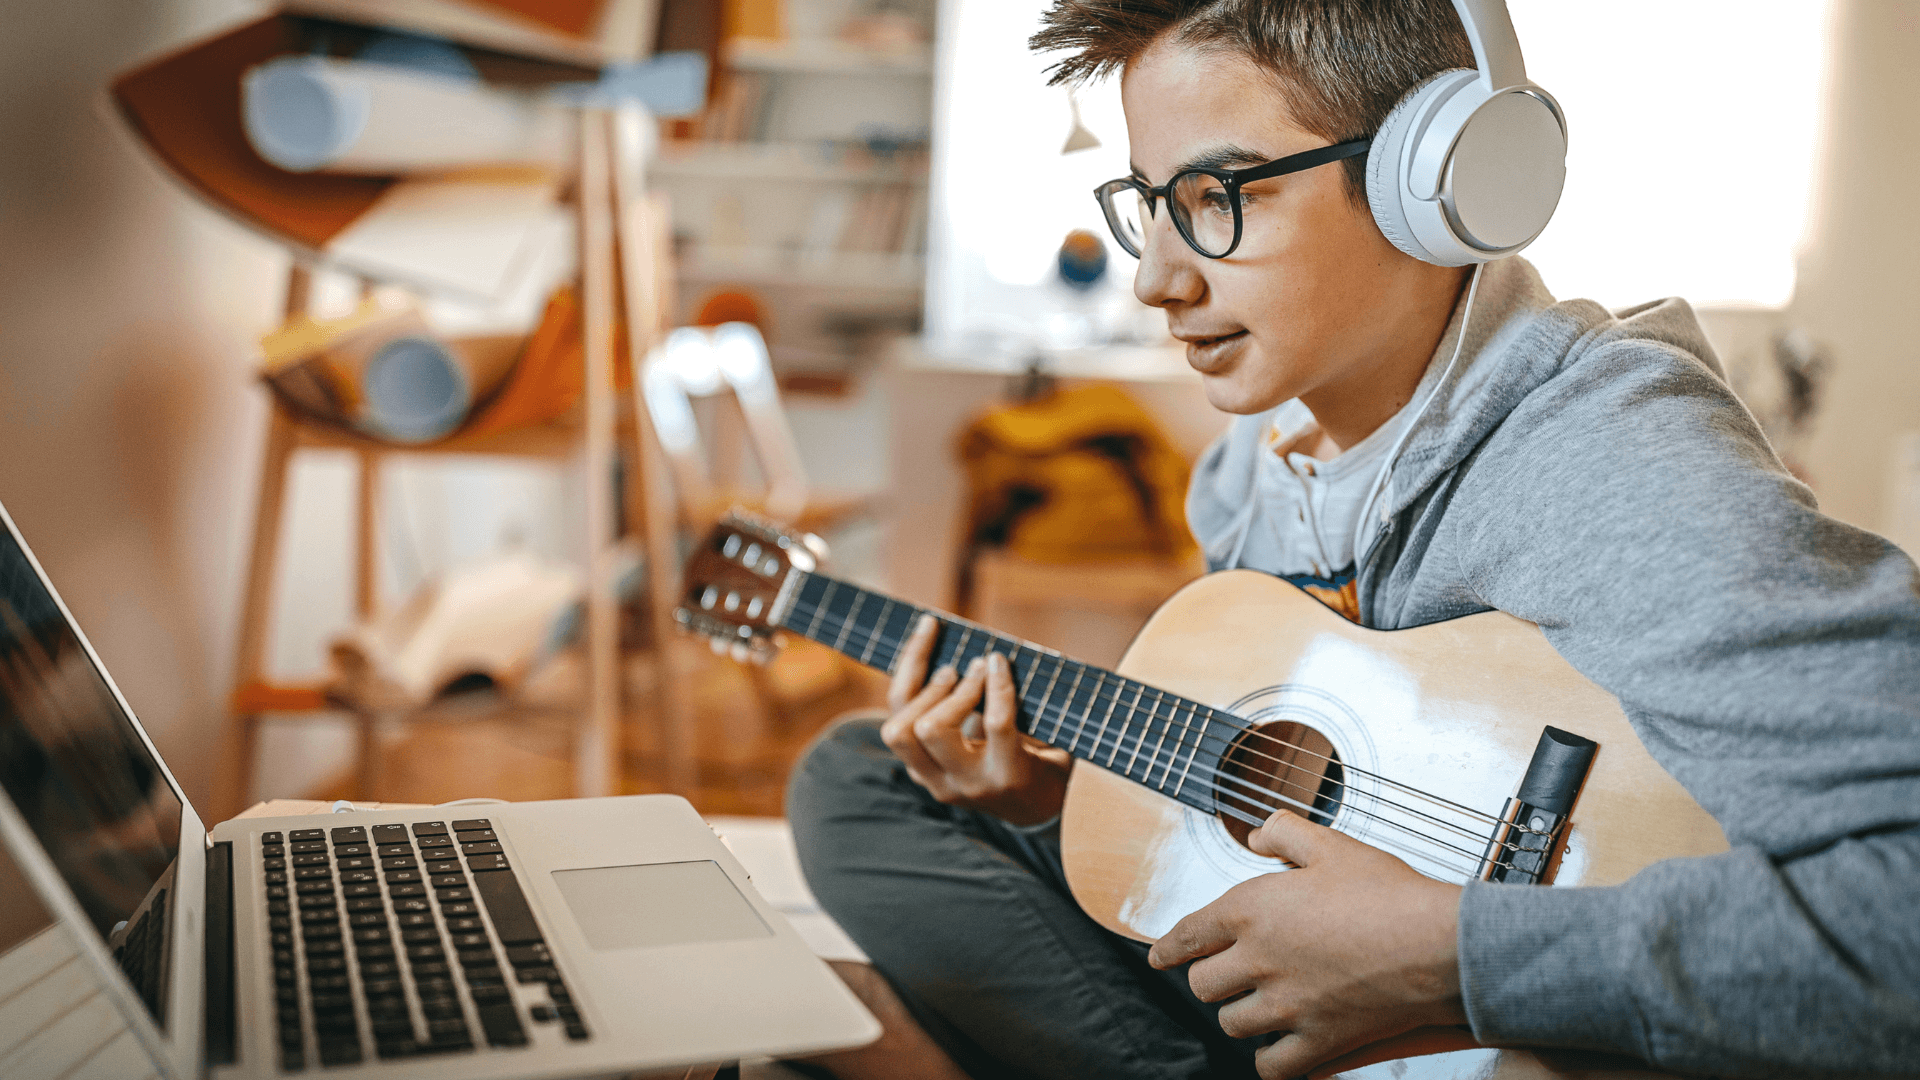 Student wearing headphones and holding a guitar looks at a laptop.